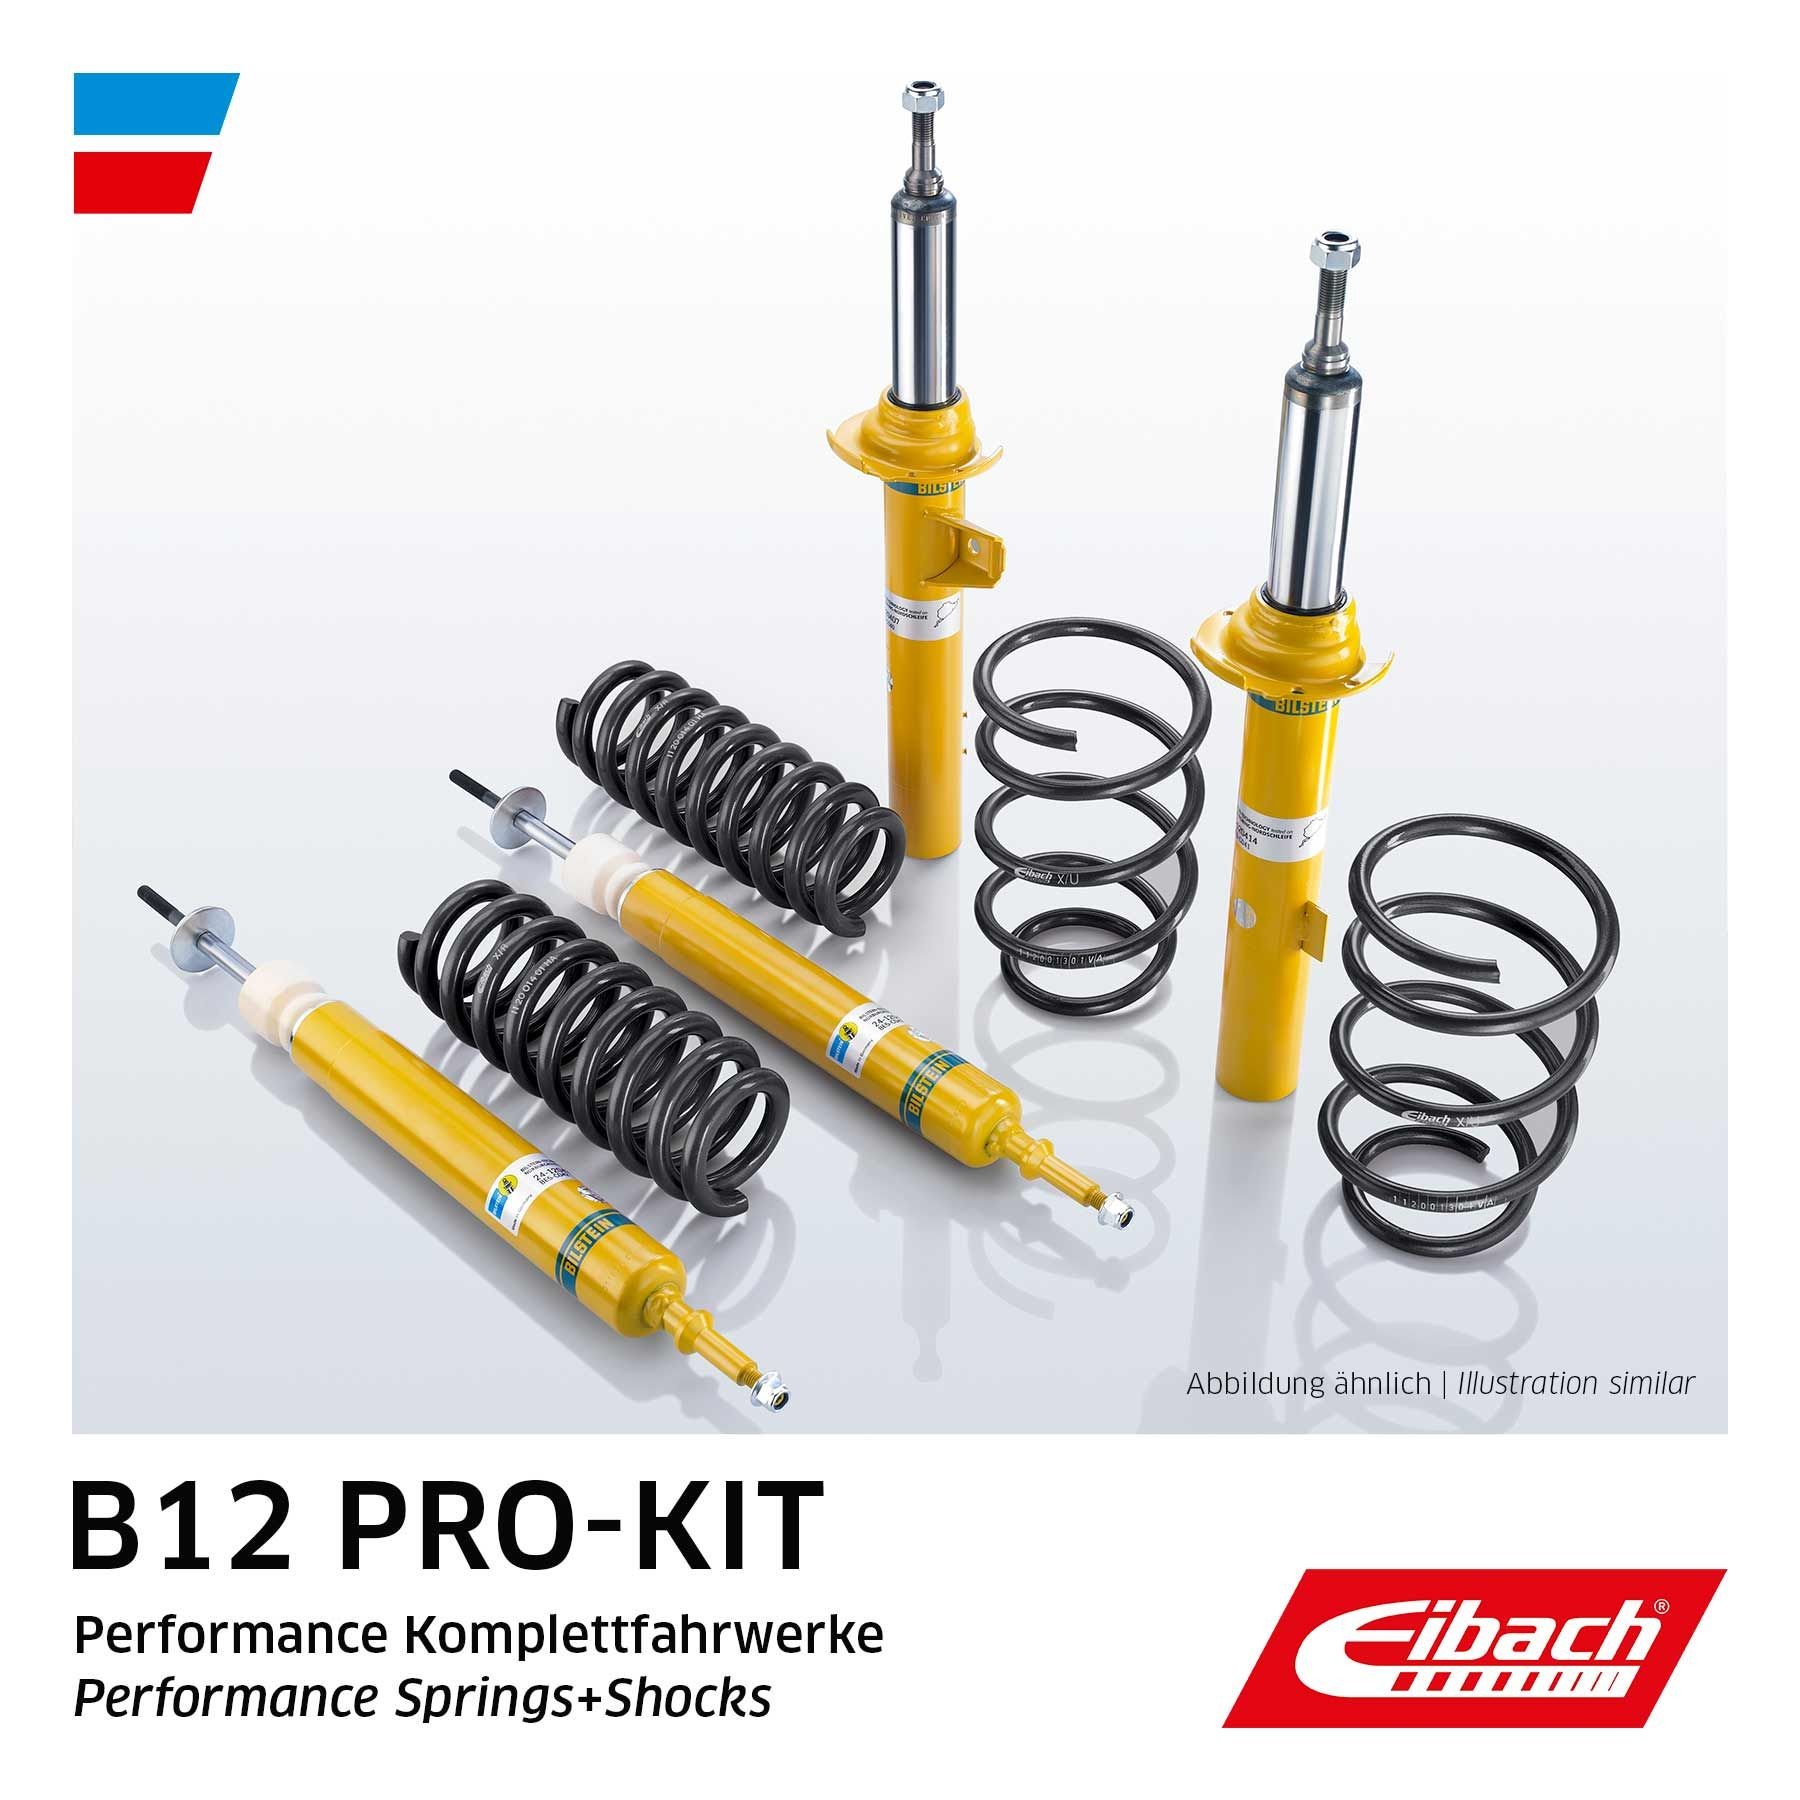 Chevrolet Suspension Kit, coil springs / shock absorbers EIBACH E90-23-009-03-22 at a good price